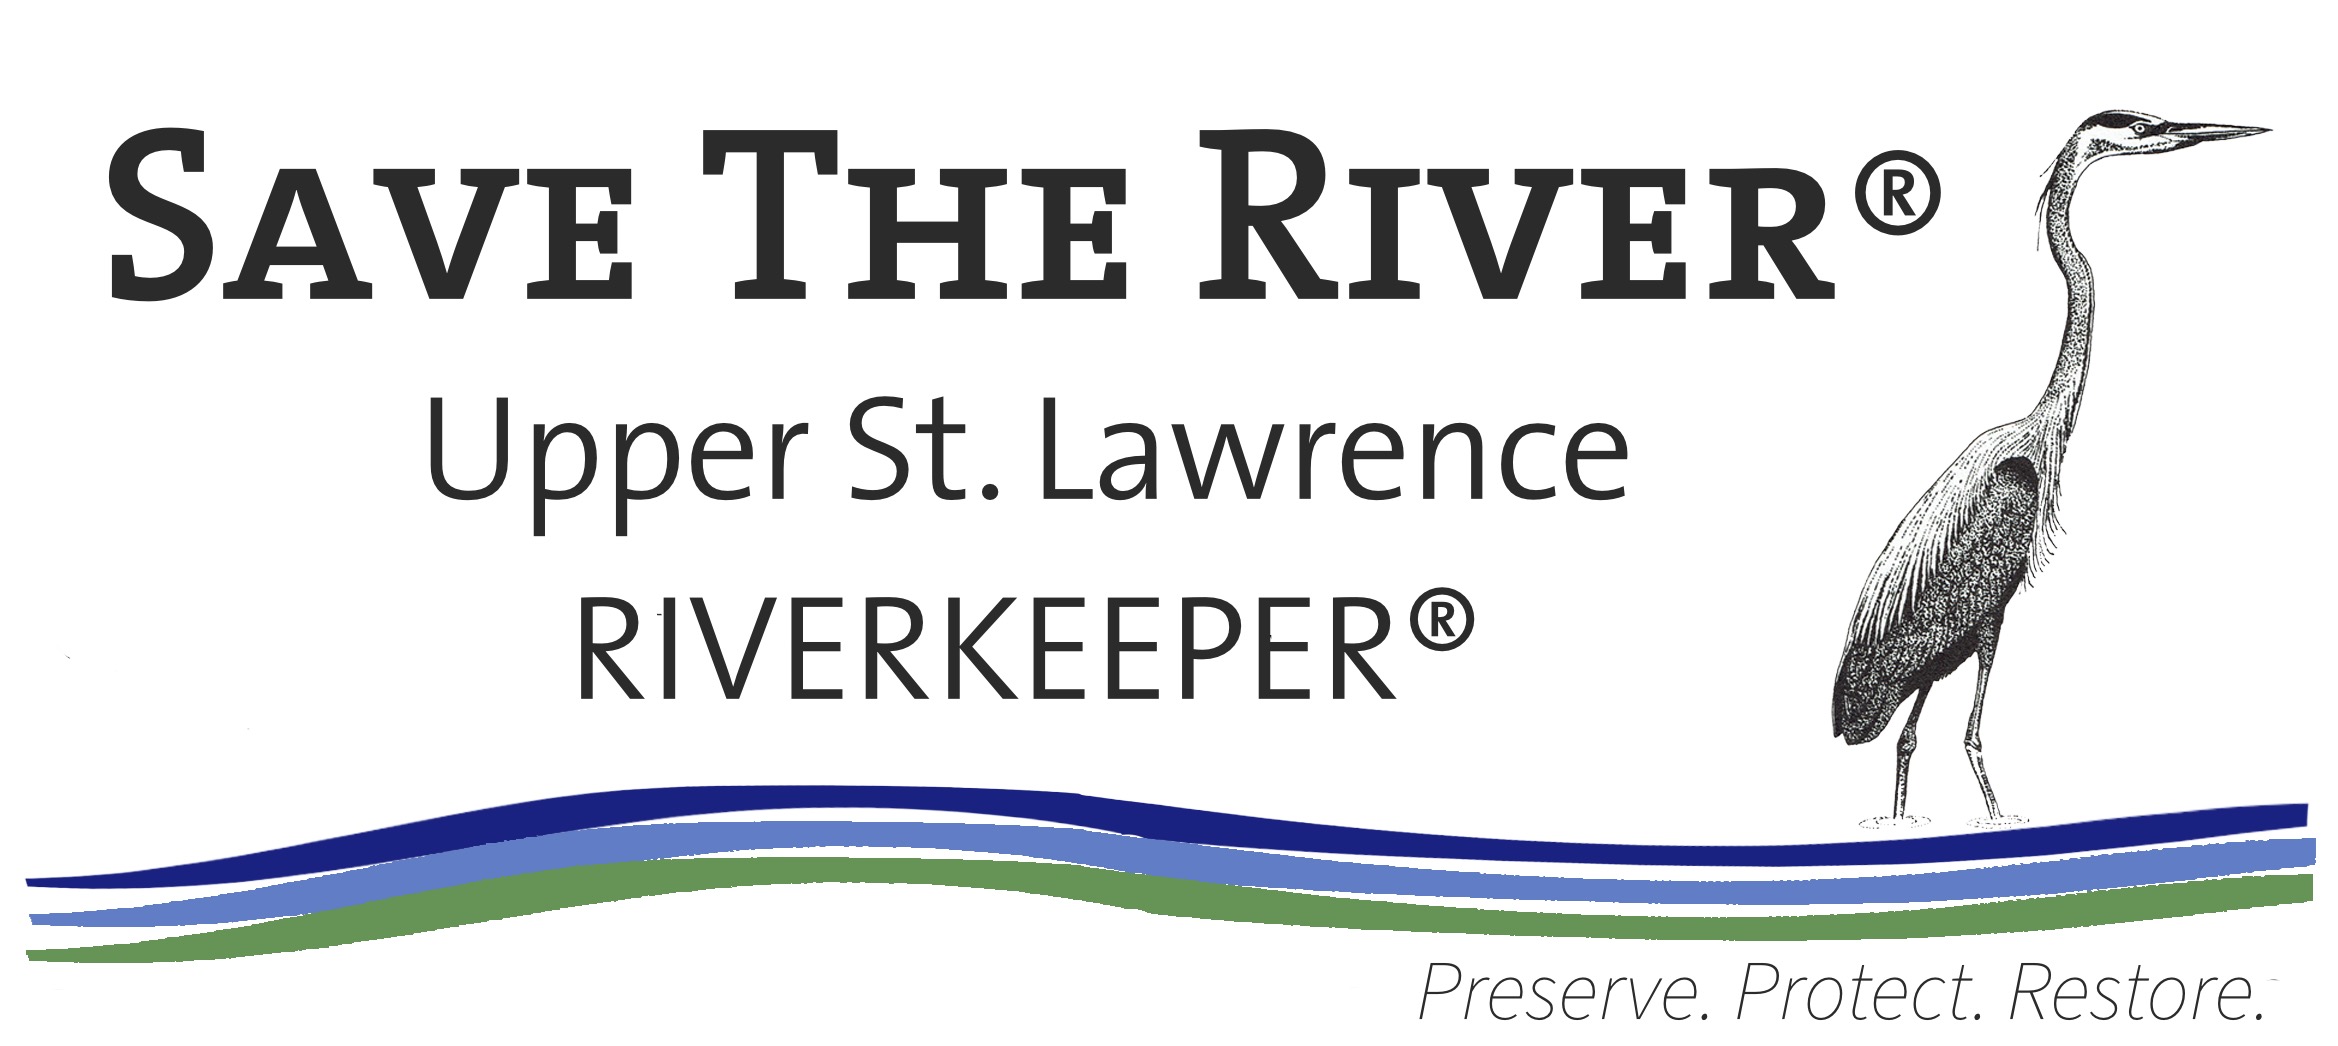 Save The River! Thousand Islands – Clayton NY on the St. Lawrence River